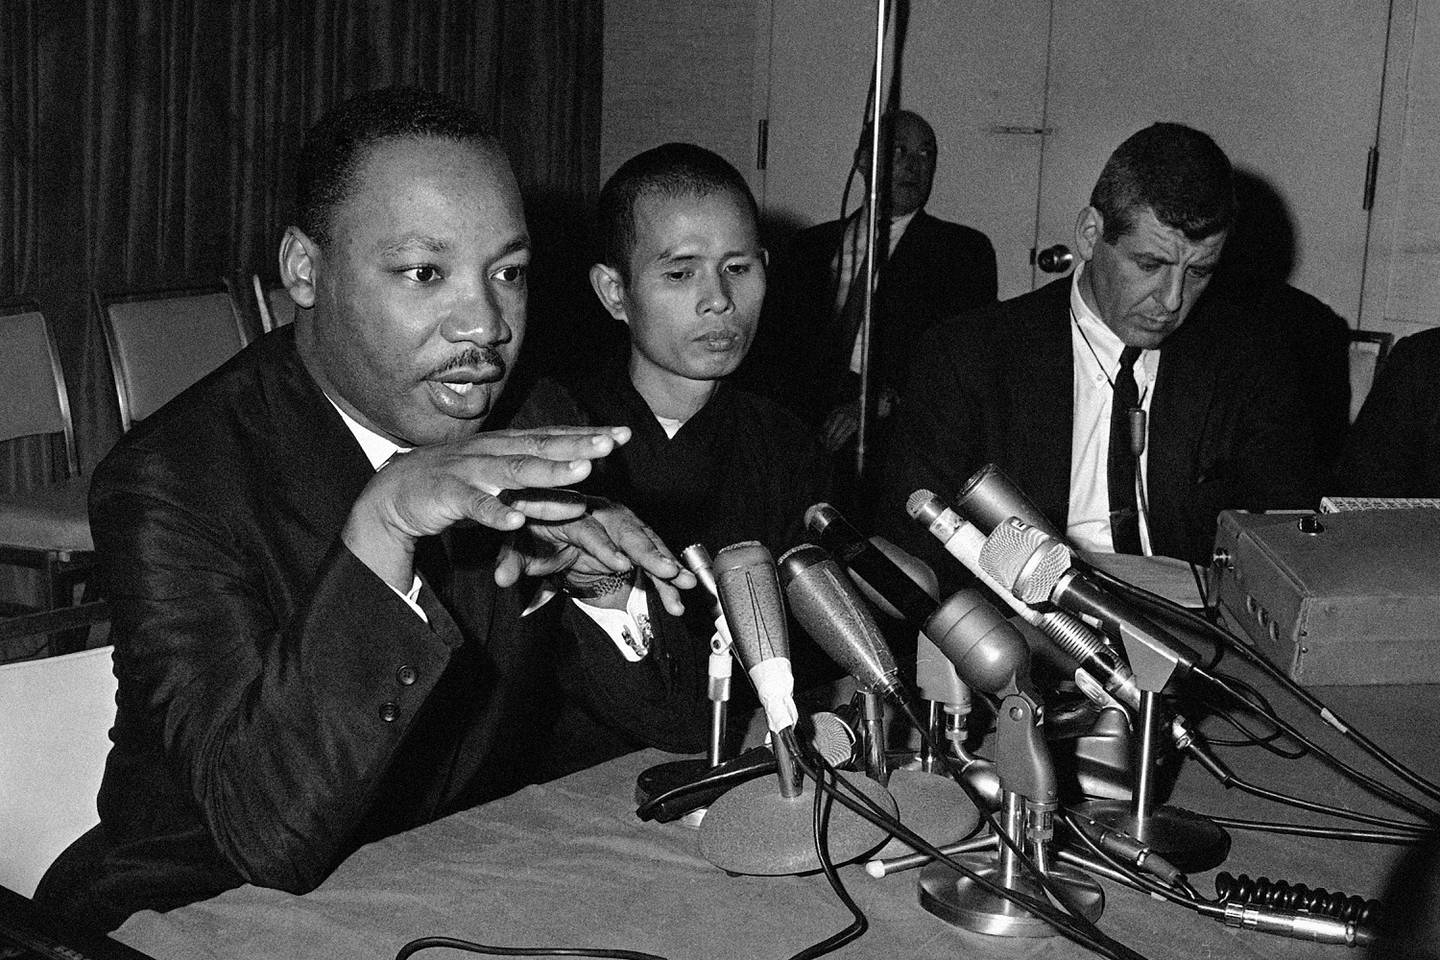 Martin Luther King, Jr, left, appearing in a Chicago news conference with Thich Nhat Hanh, a Buddhist monk from Vietnam, on May 31, 1966. AP